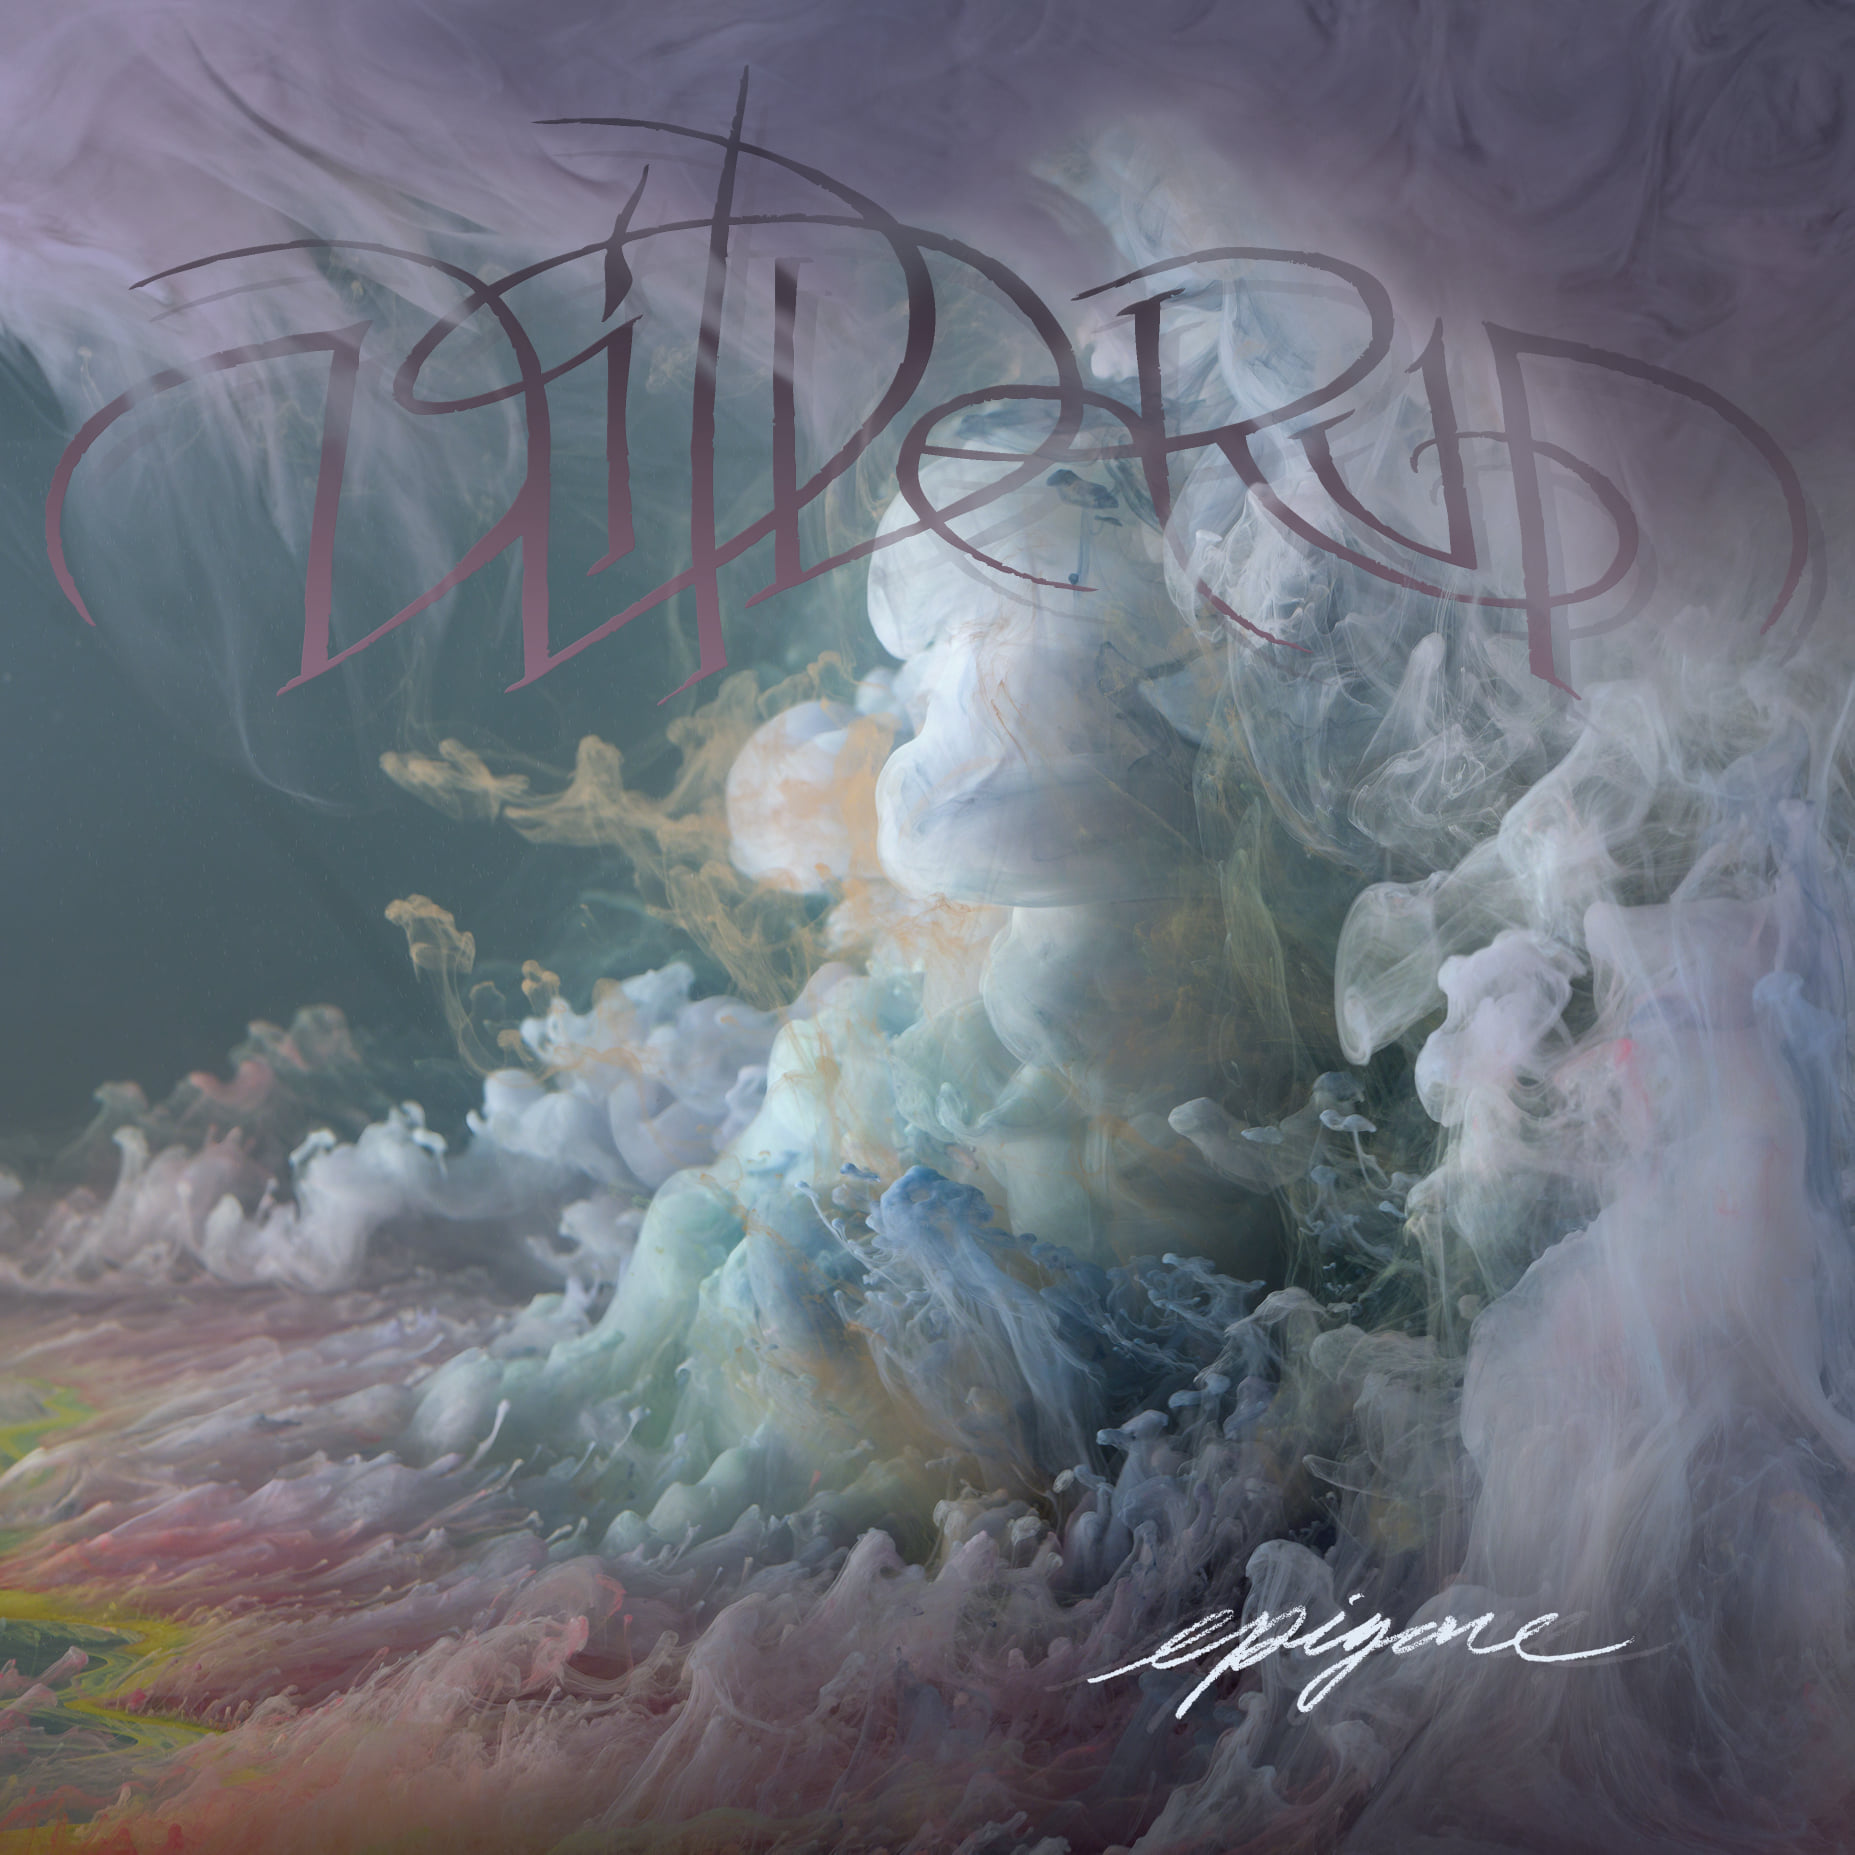 You are currently viewing WILDERUN: New Single Entitled “Identifier”.